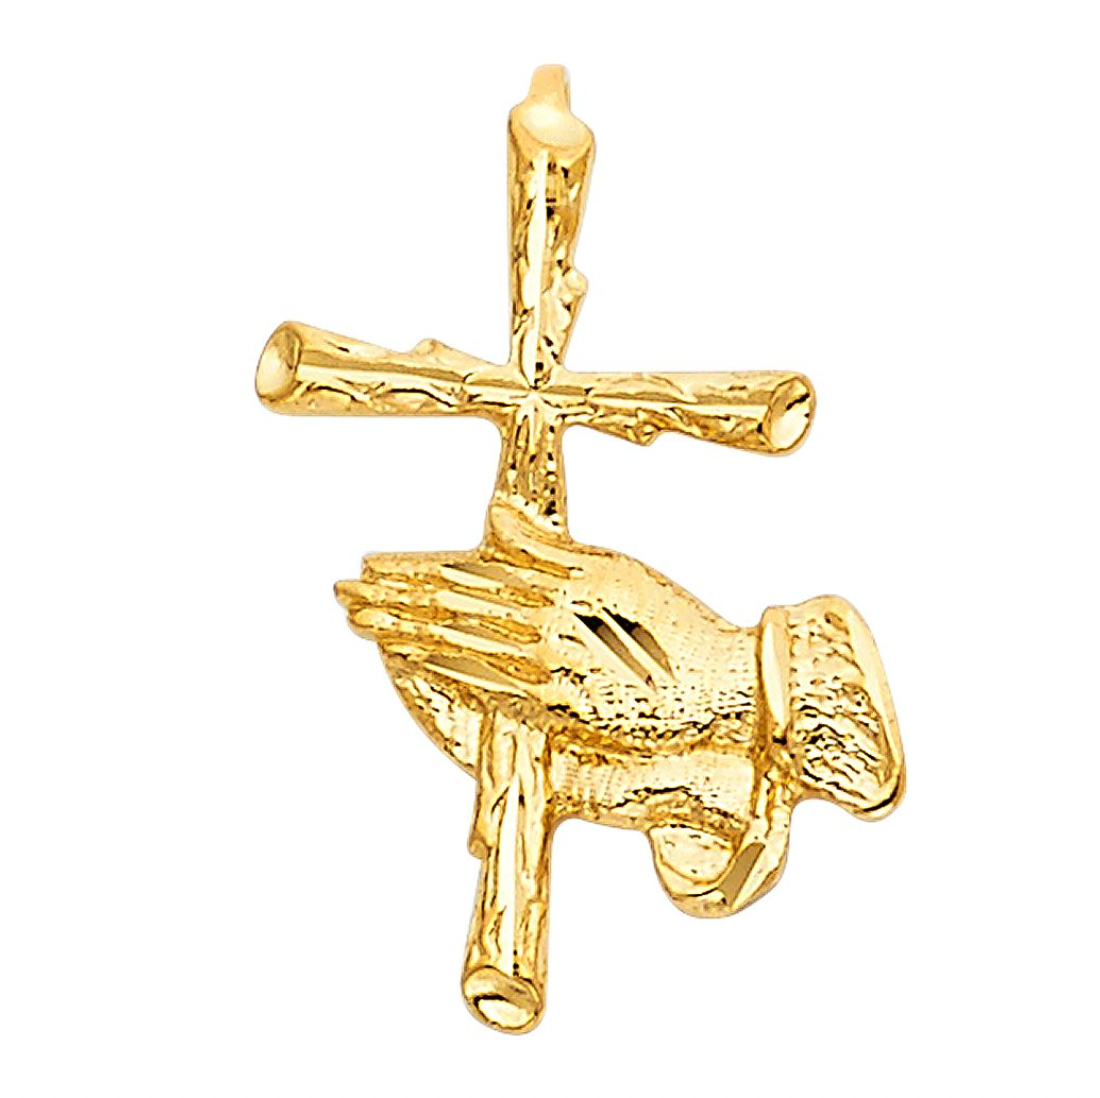 Gold Praying Hand with Cross Pendant Model-1480 - Charlie & Co. Jewelry